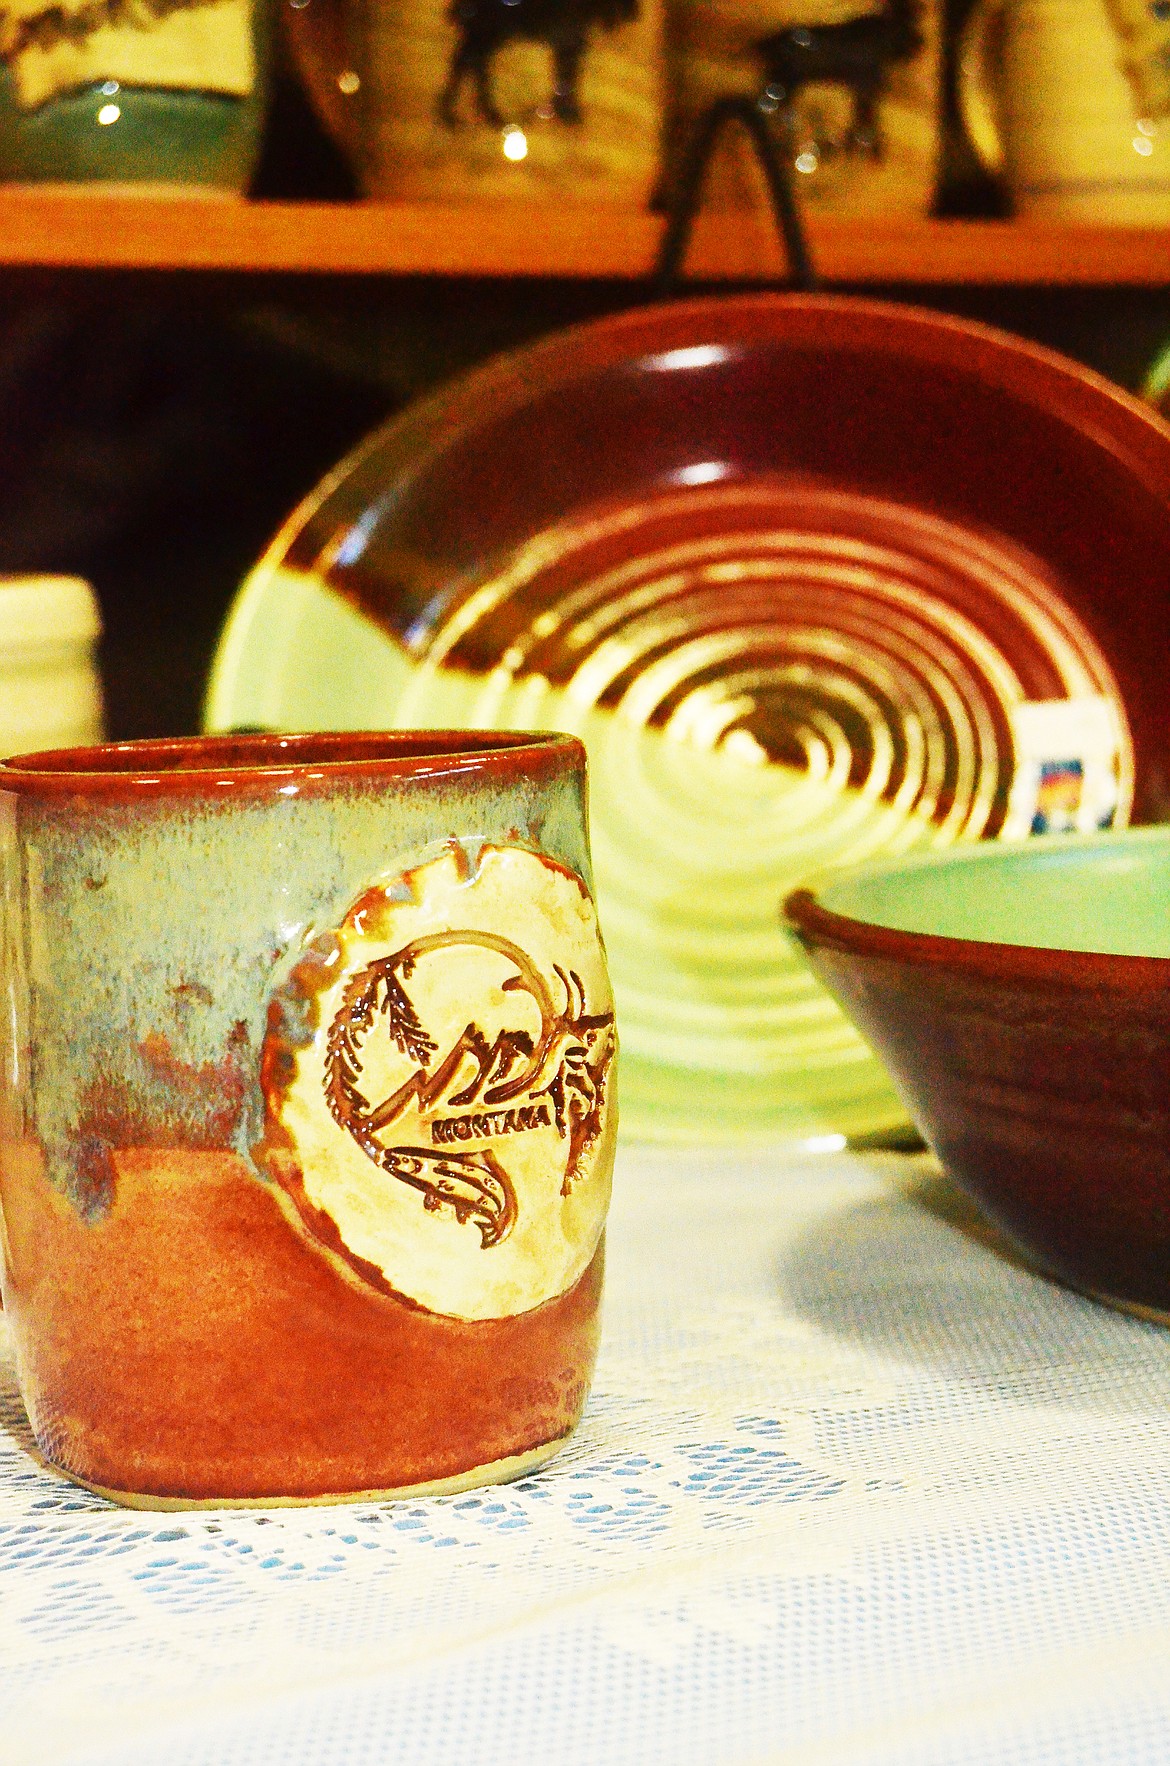 Whistle Creek Pottery by Ellen Childress certainley had plenty of works on show that had plenty of art lovers stopping in for a look.